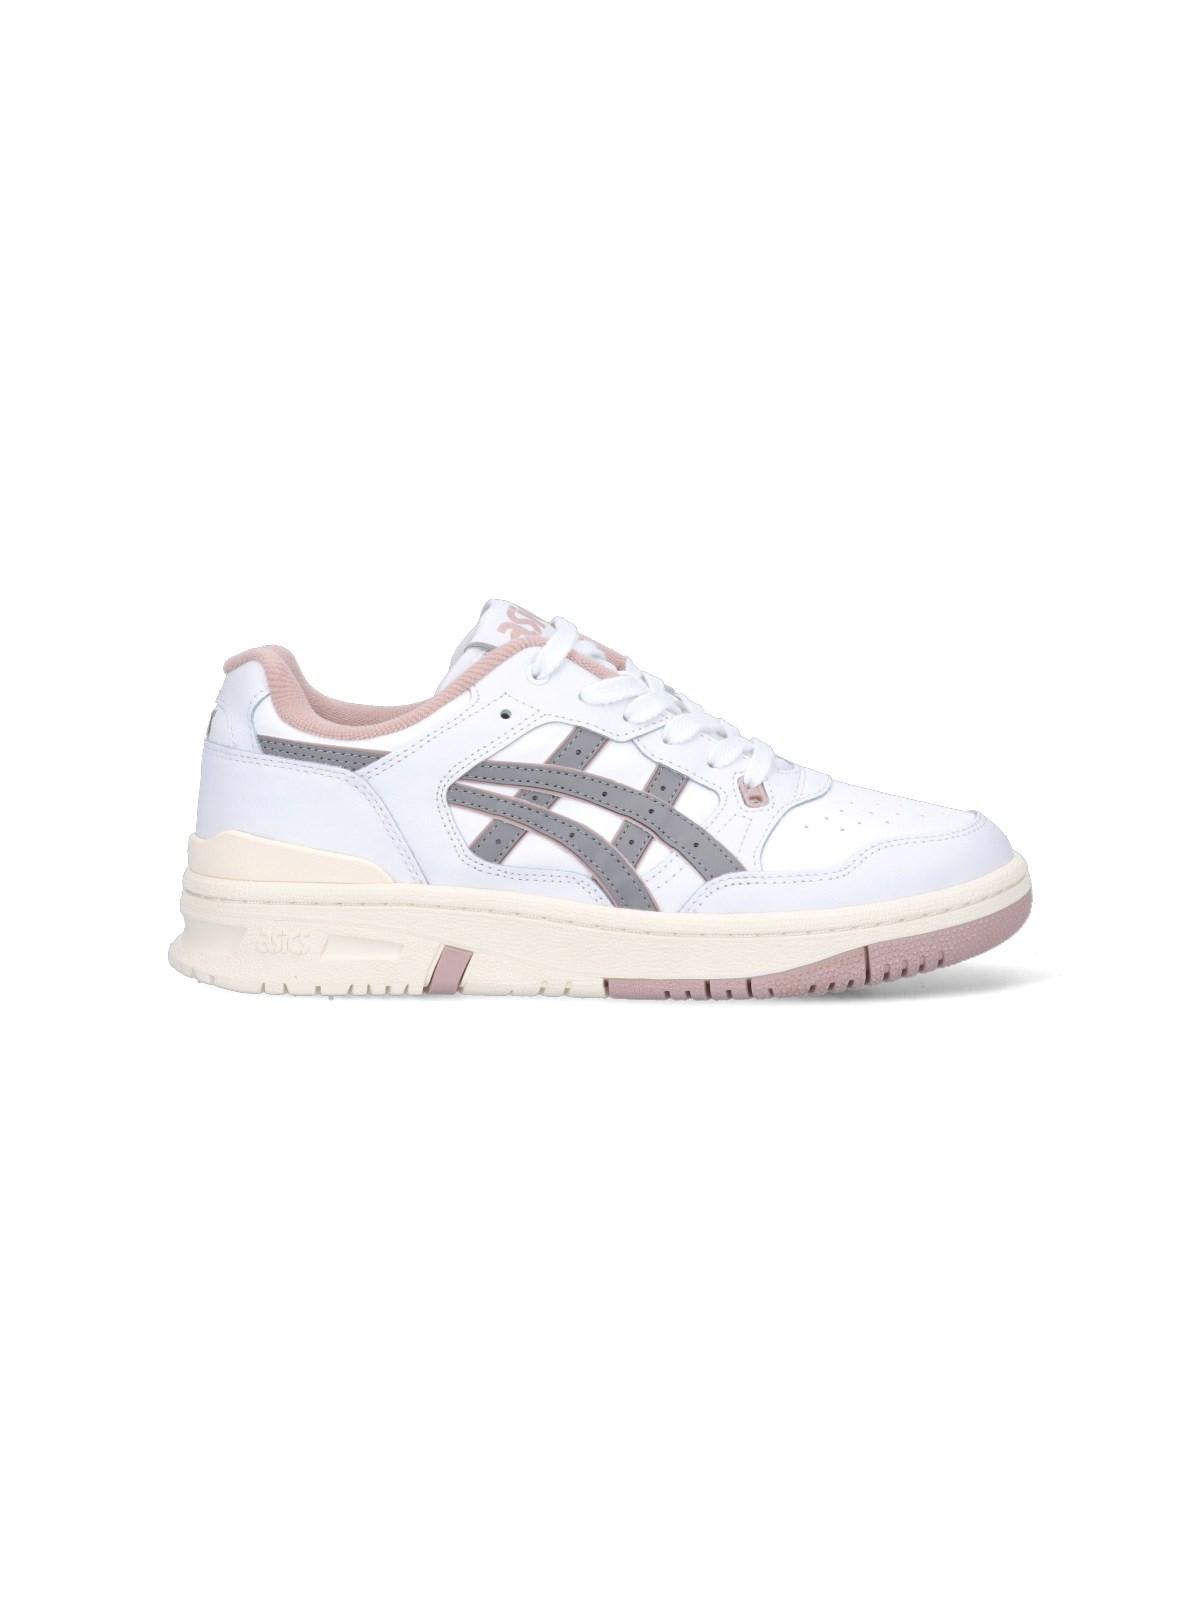 Shop Asics Ex89 Sneakers In White/clay Grey